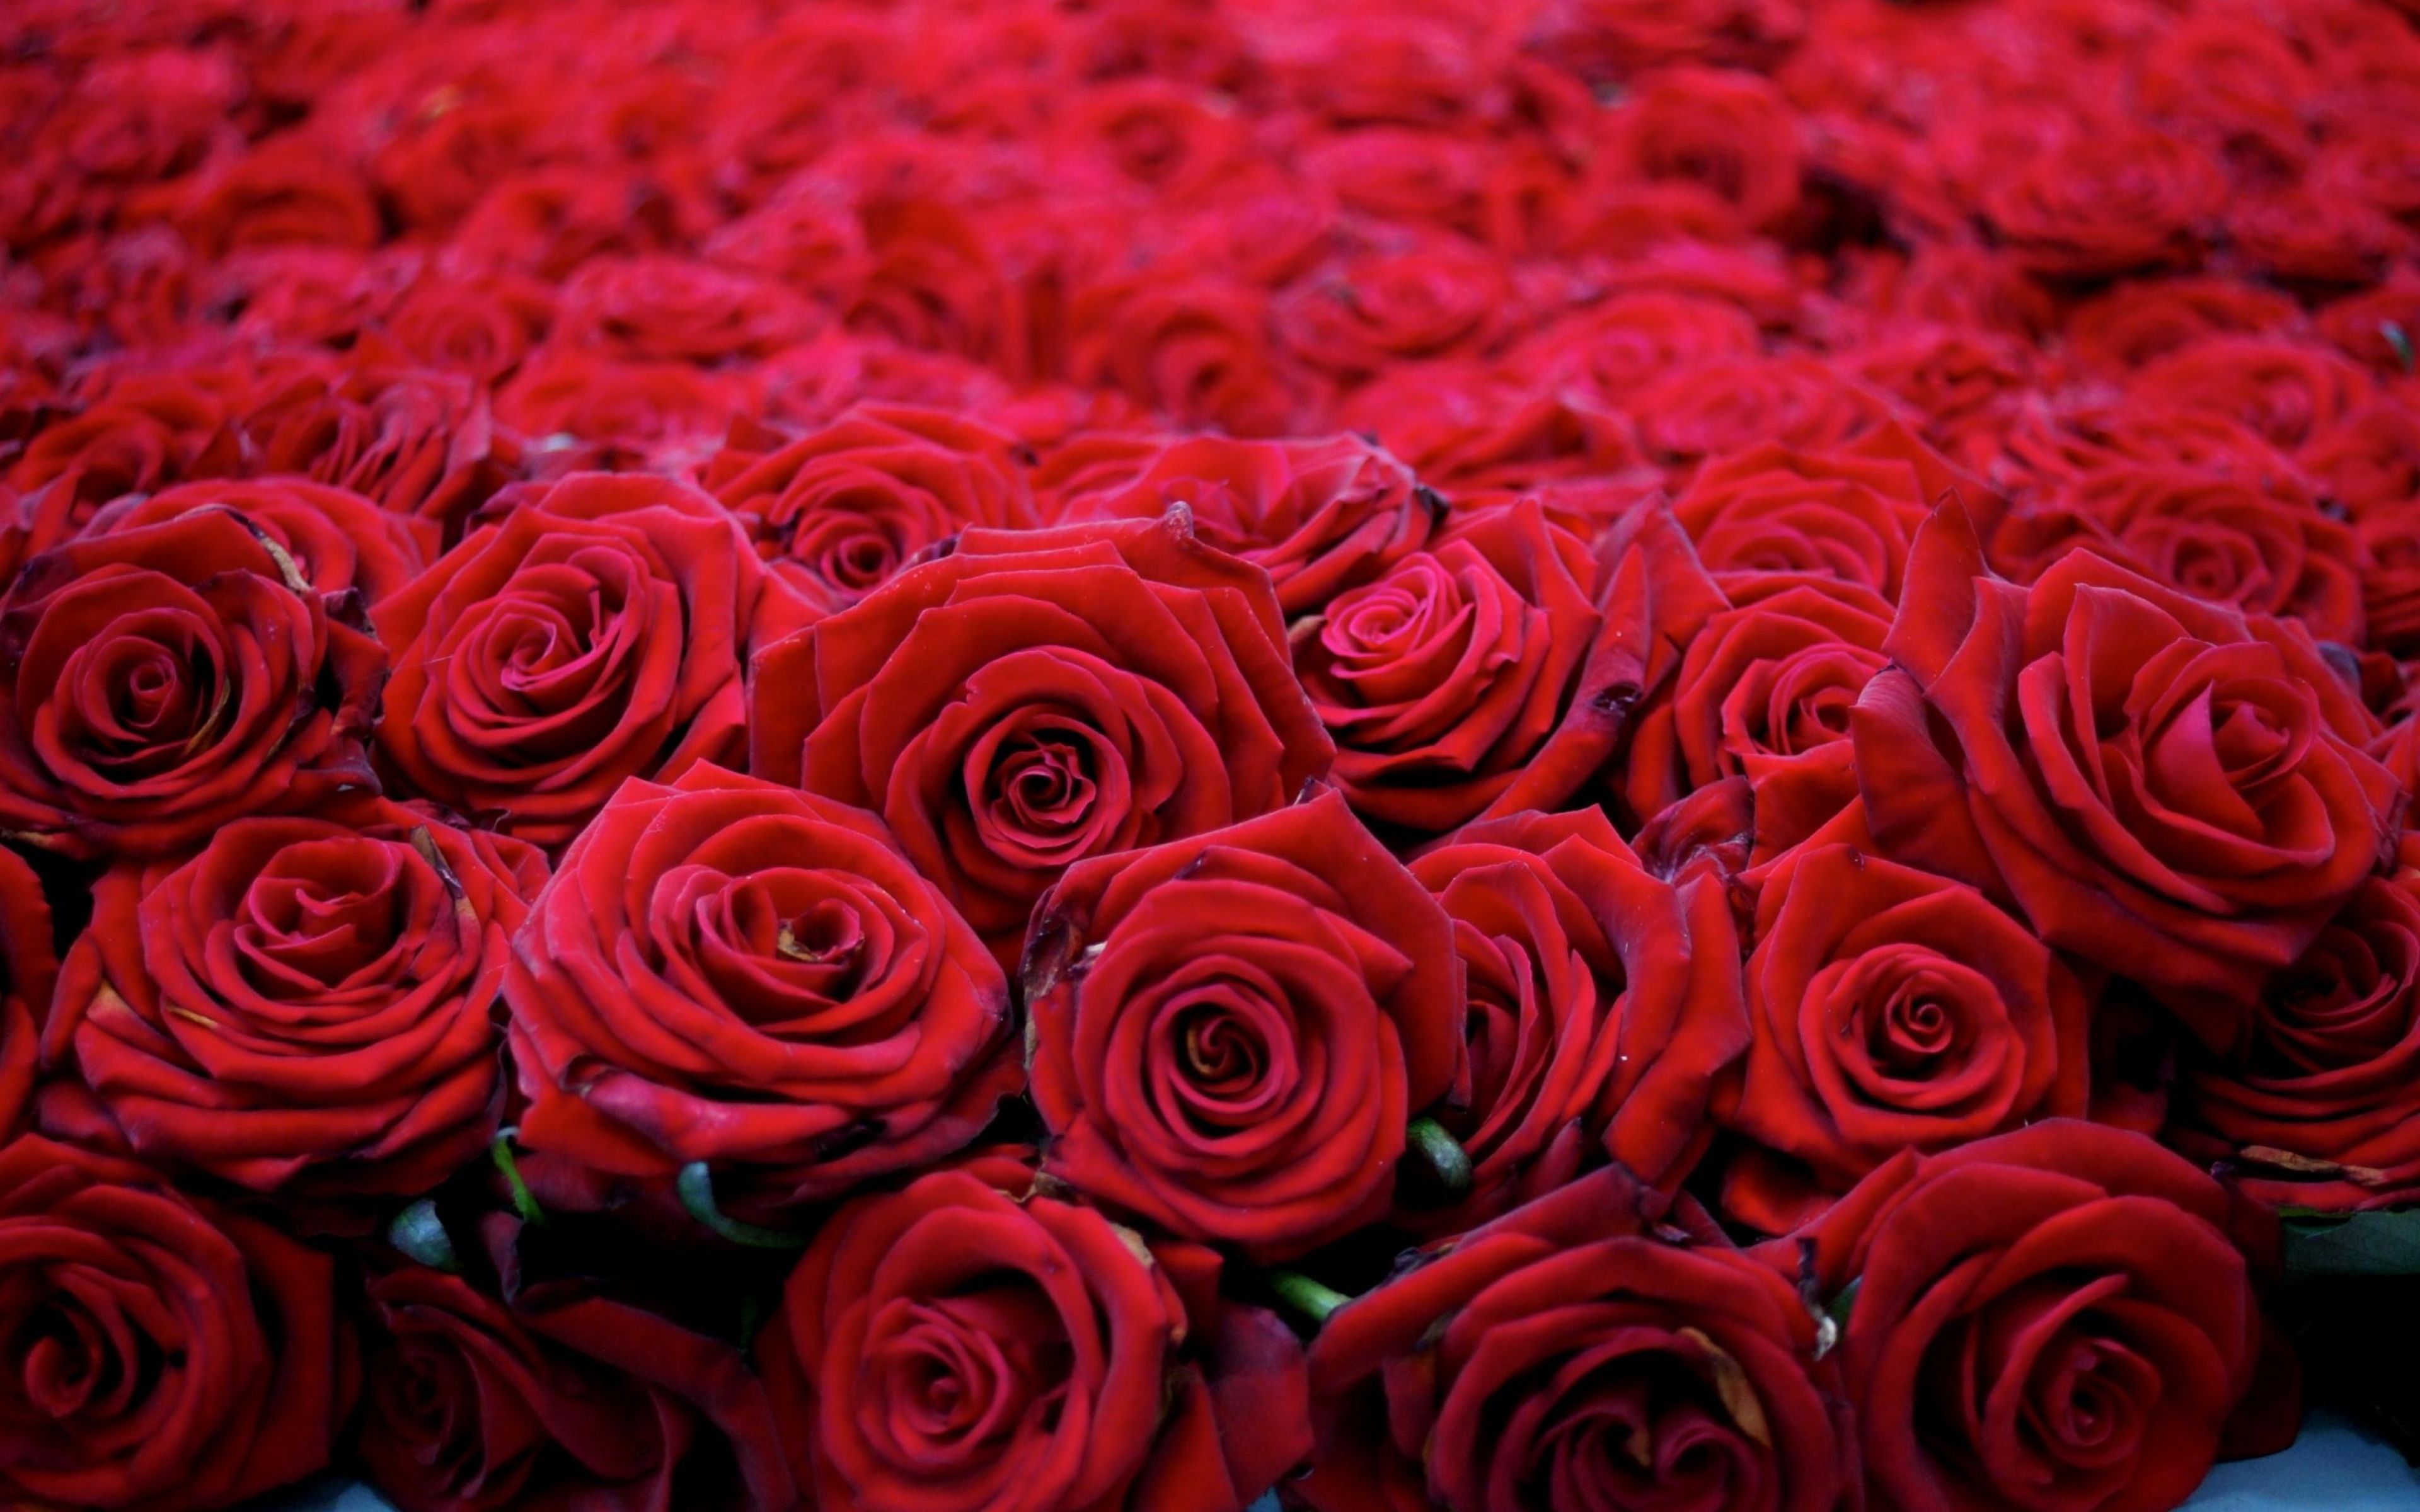 Field of Roses Wallpapers on WallpaperDog